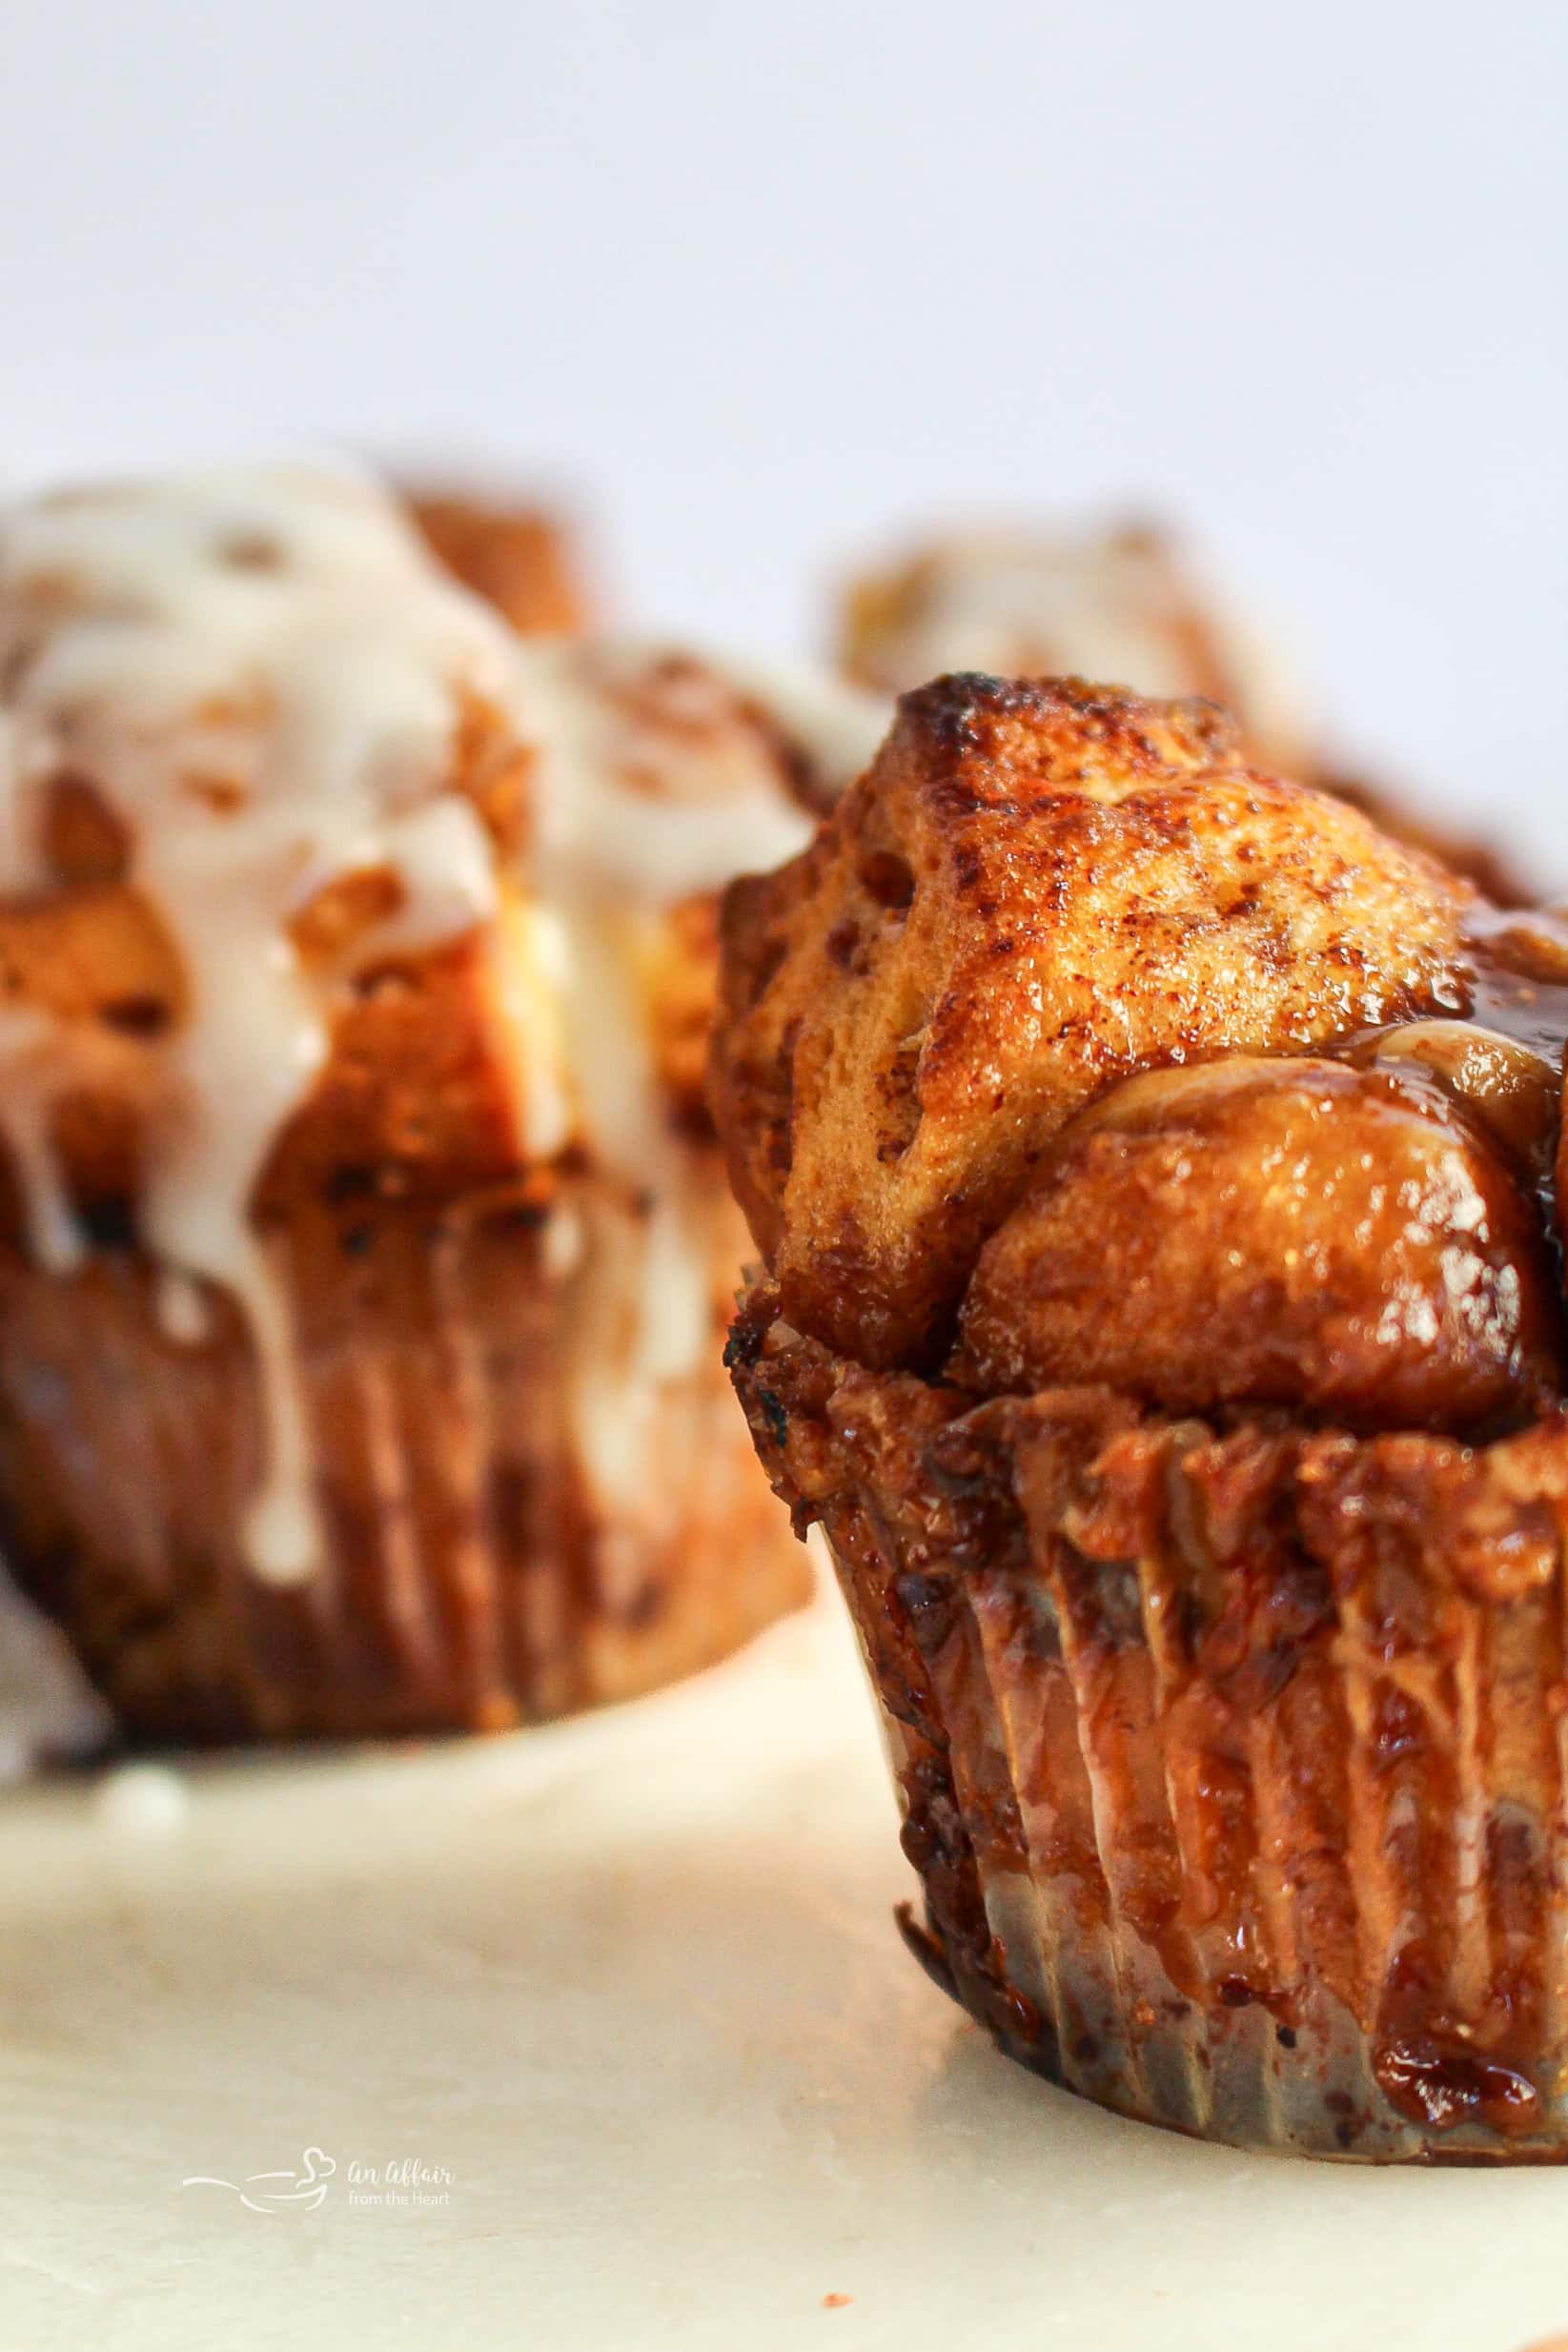 https://anaffairfromtheheart.com/wp-content/uploads/2015/11/Toffee-Monkey-Bread-Muffins-1.jpg